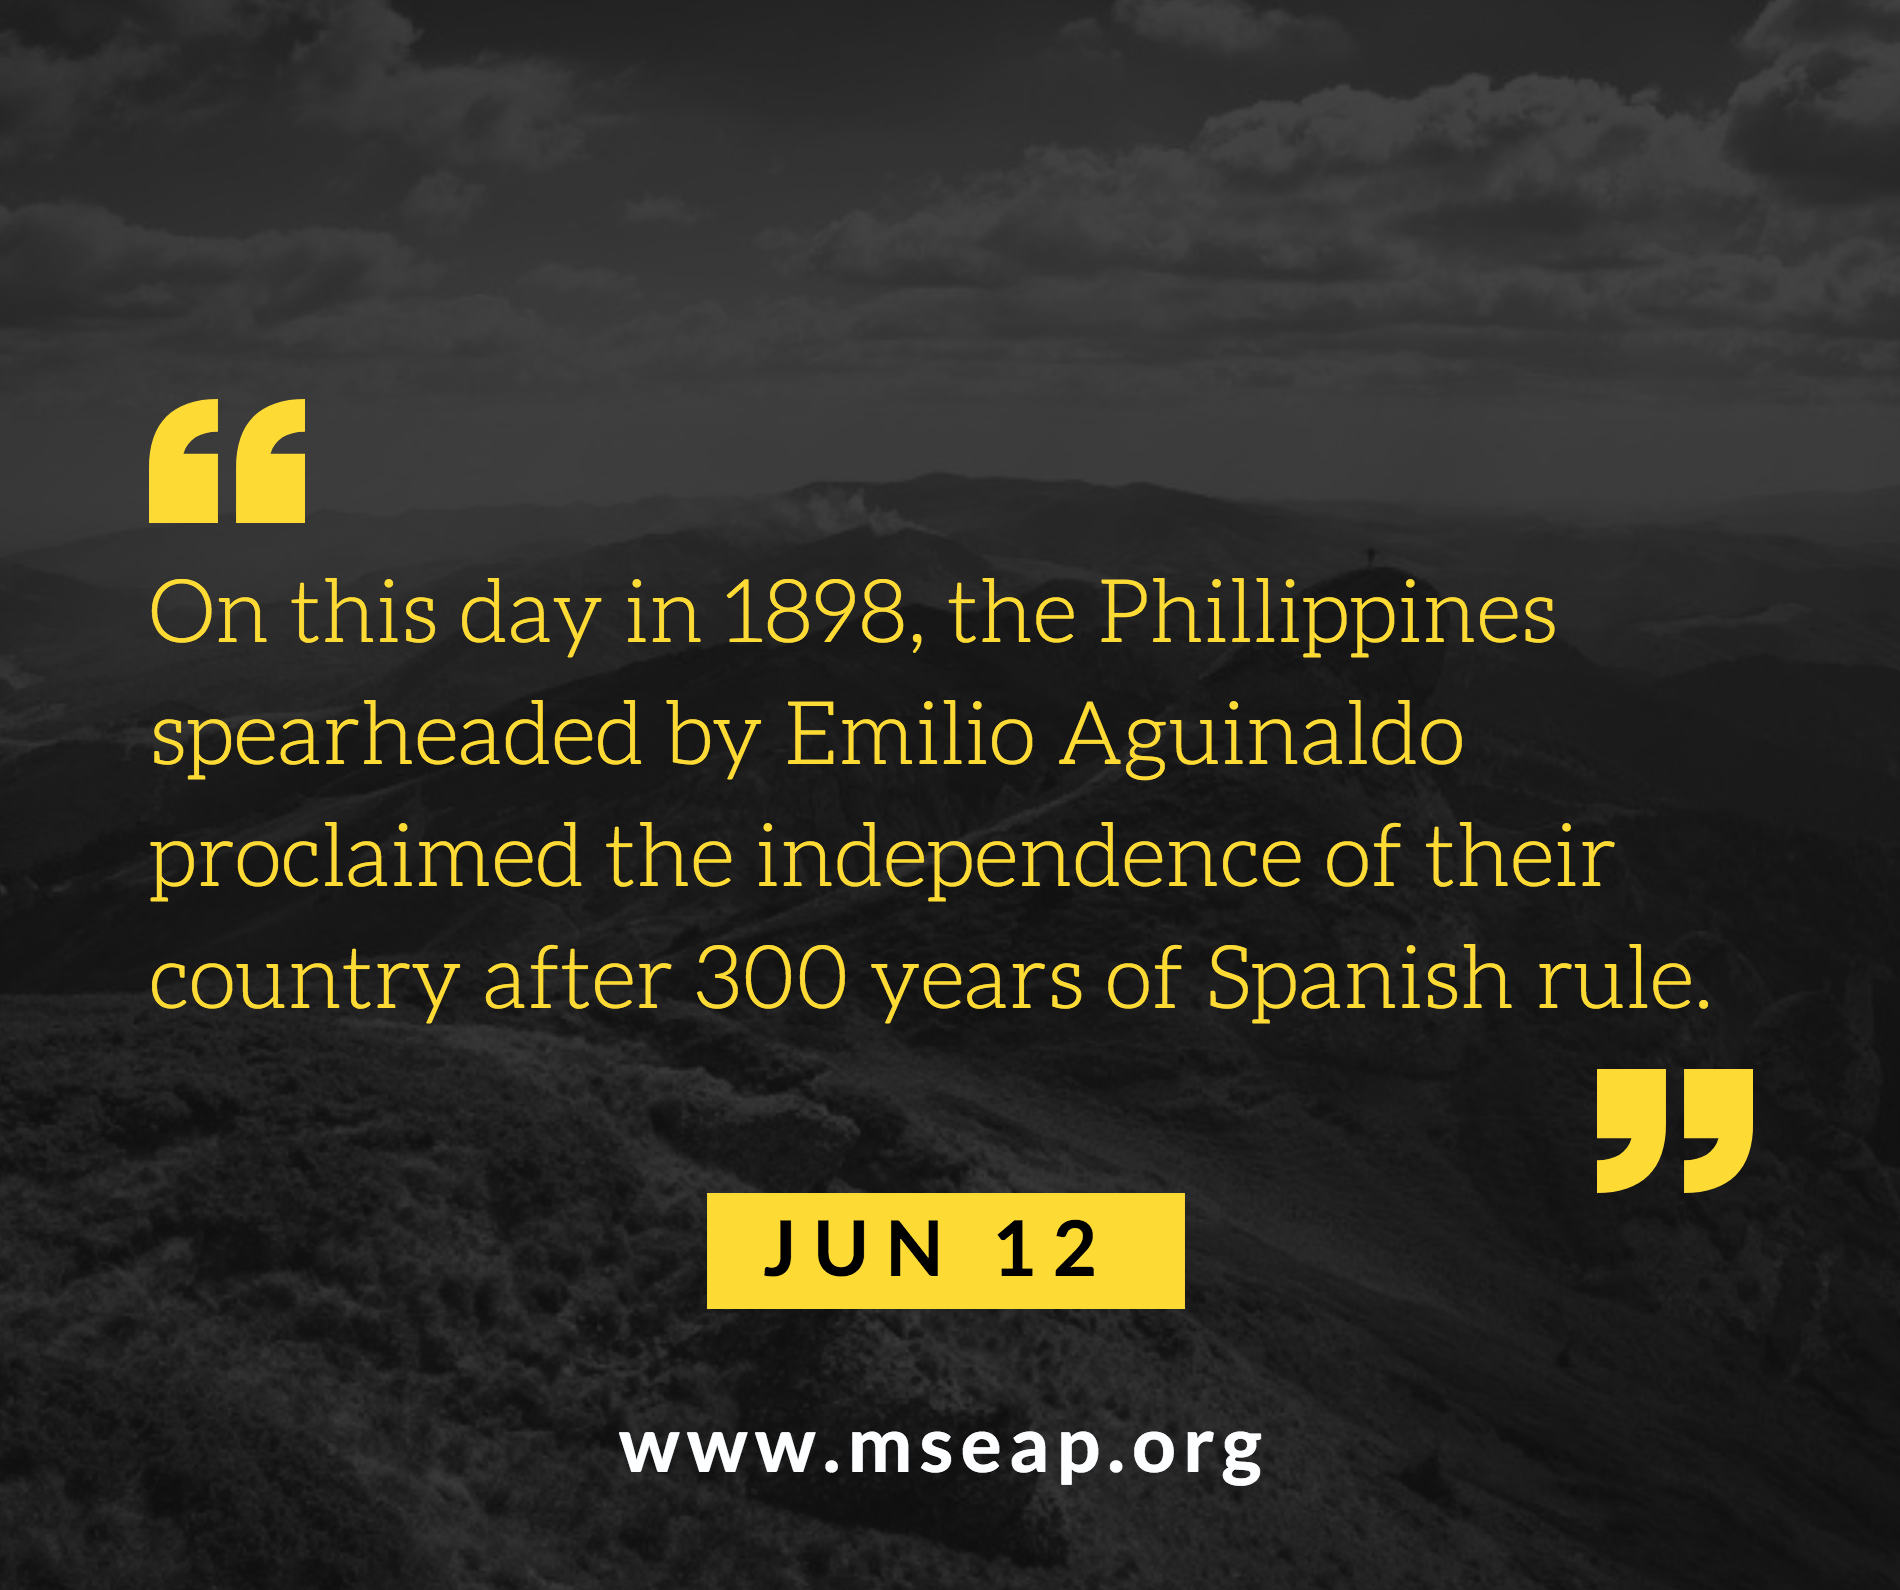 [Today in history] June 12